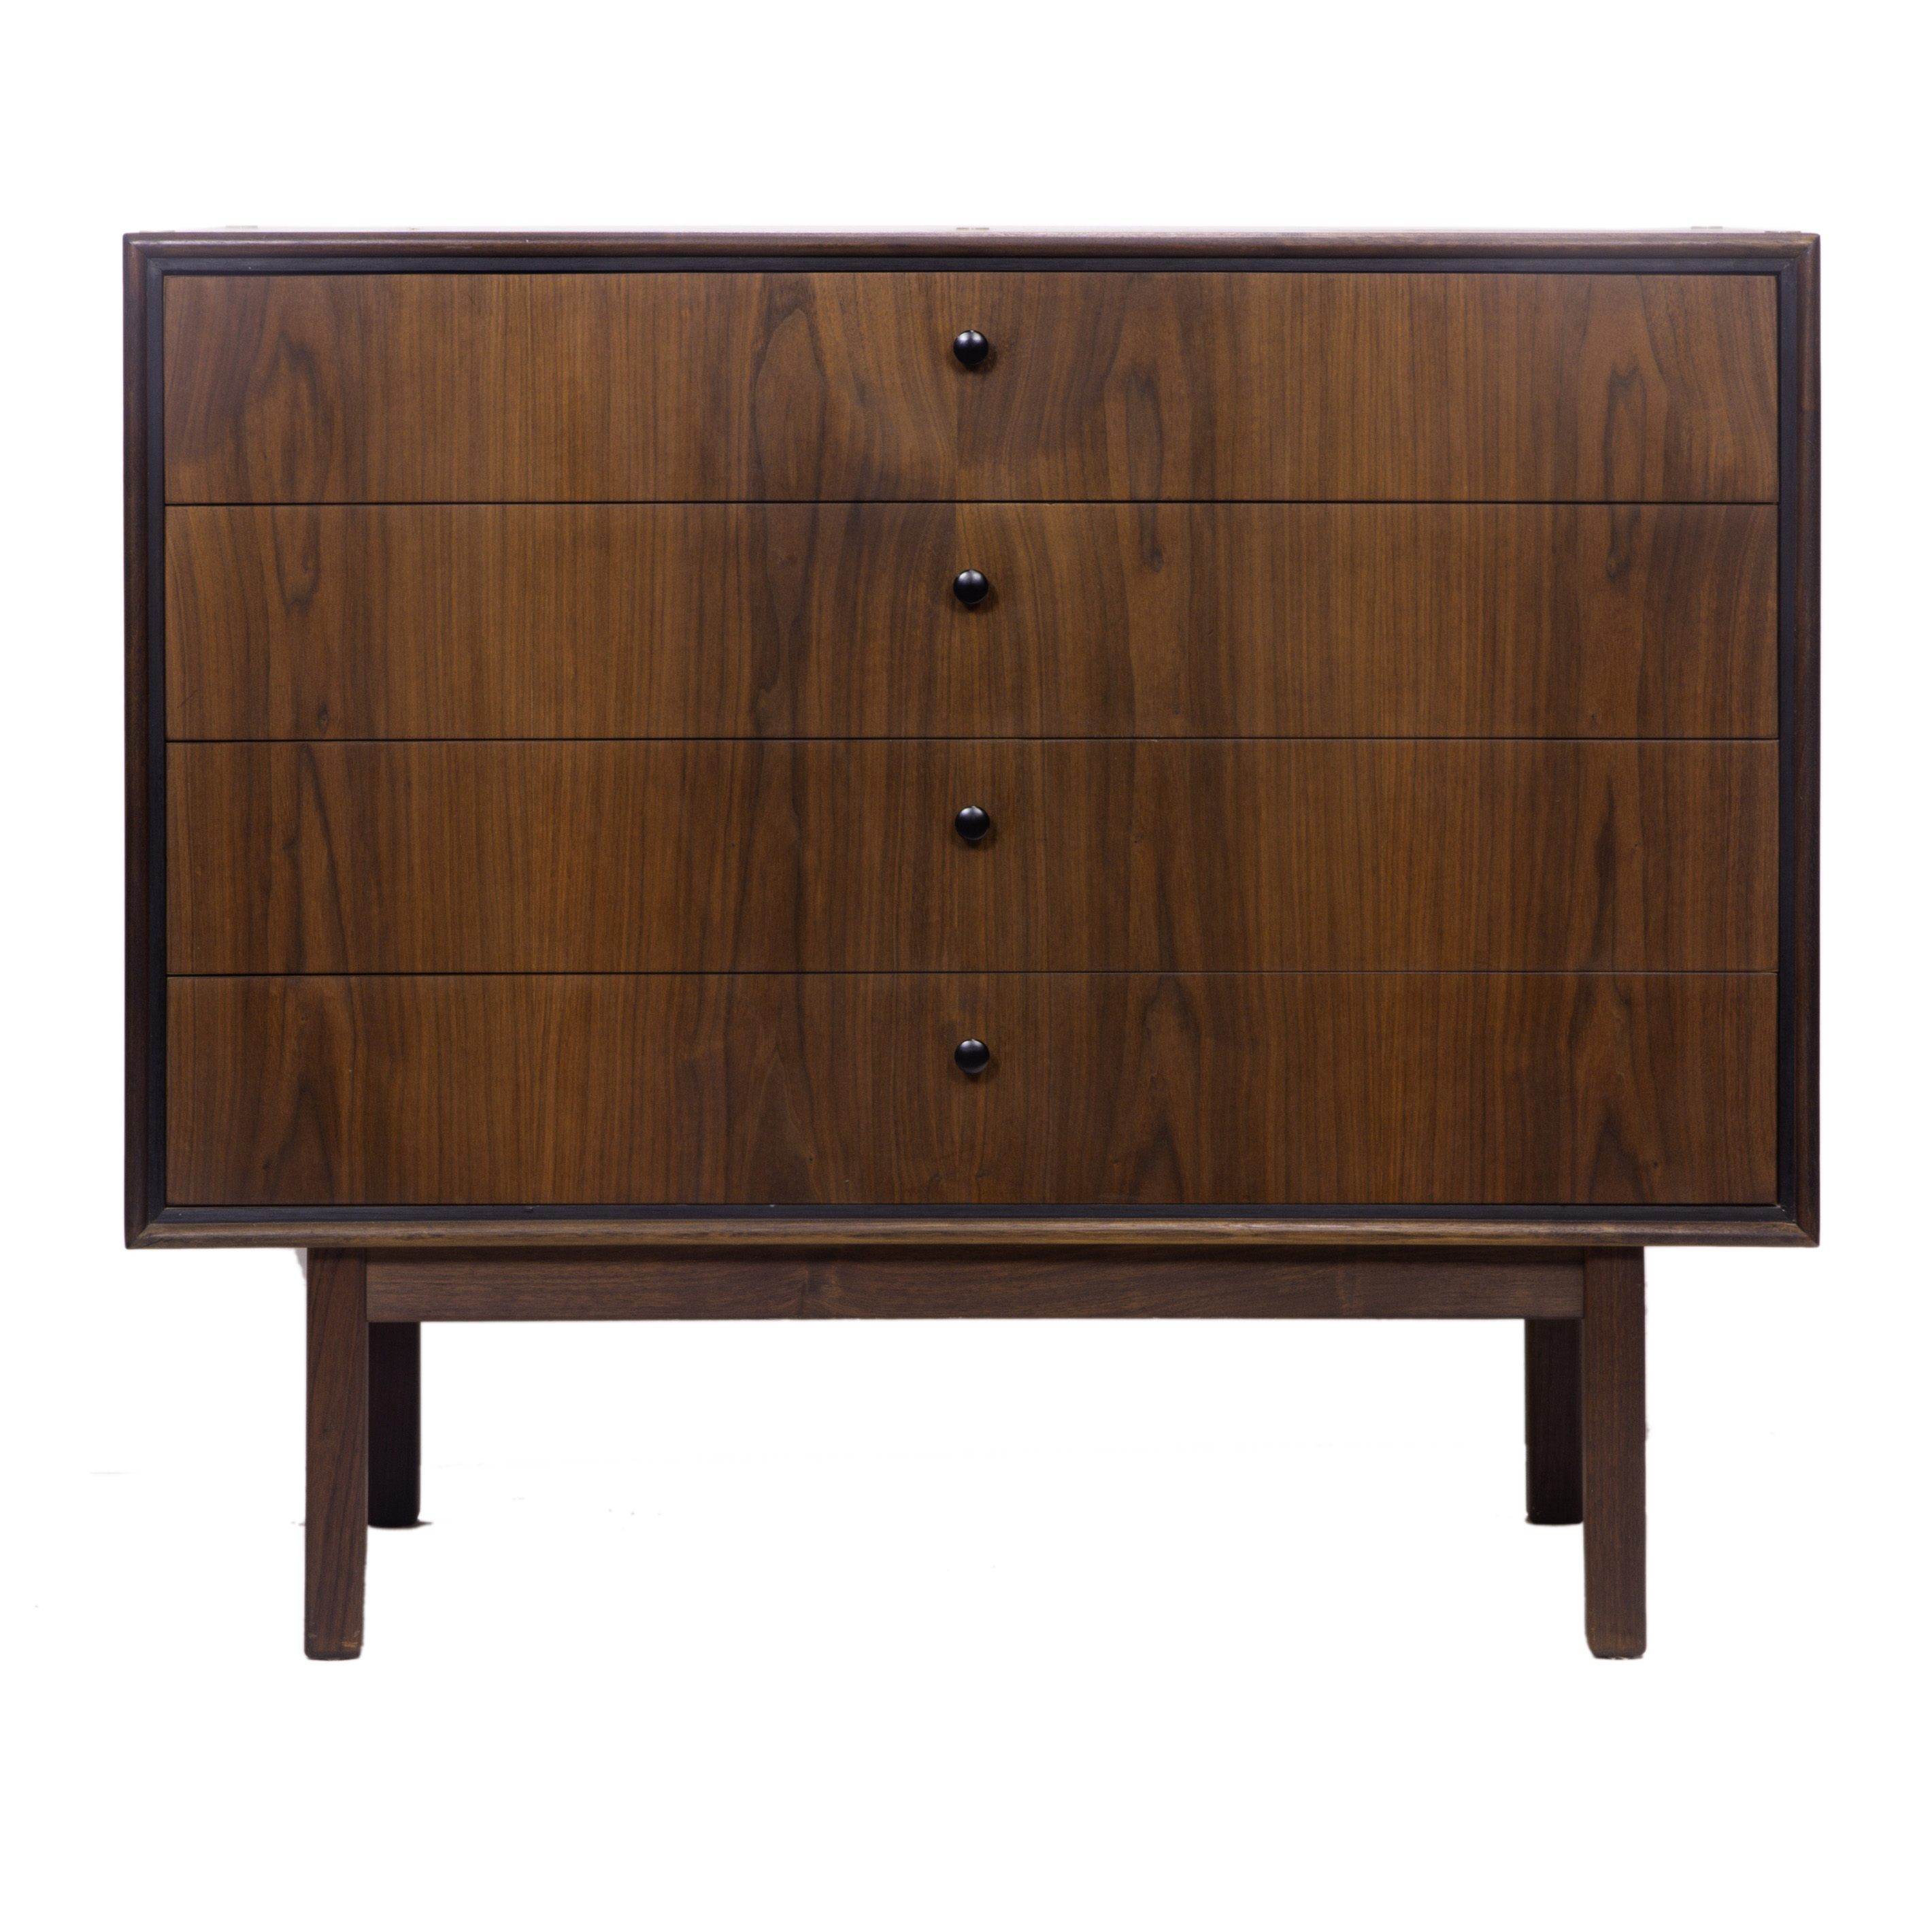 MID CENTURY MODERN CHEST OF DRAWERS